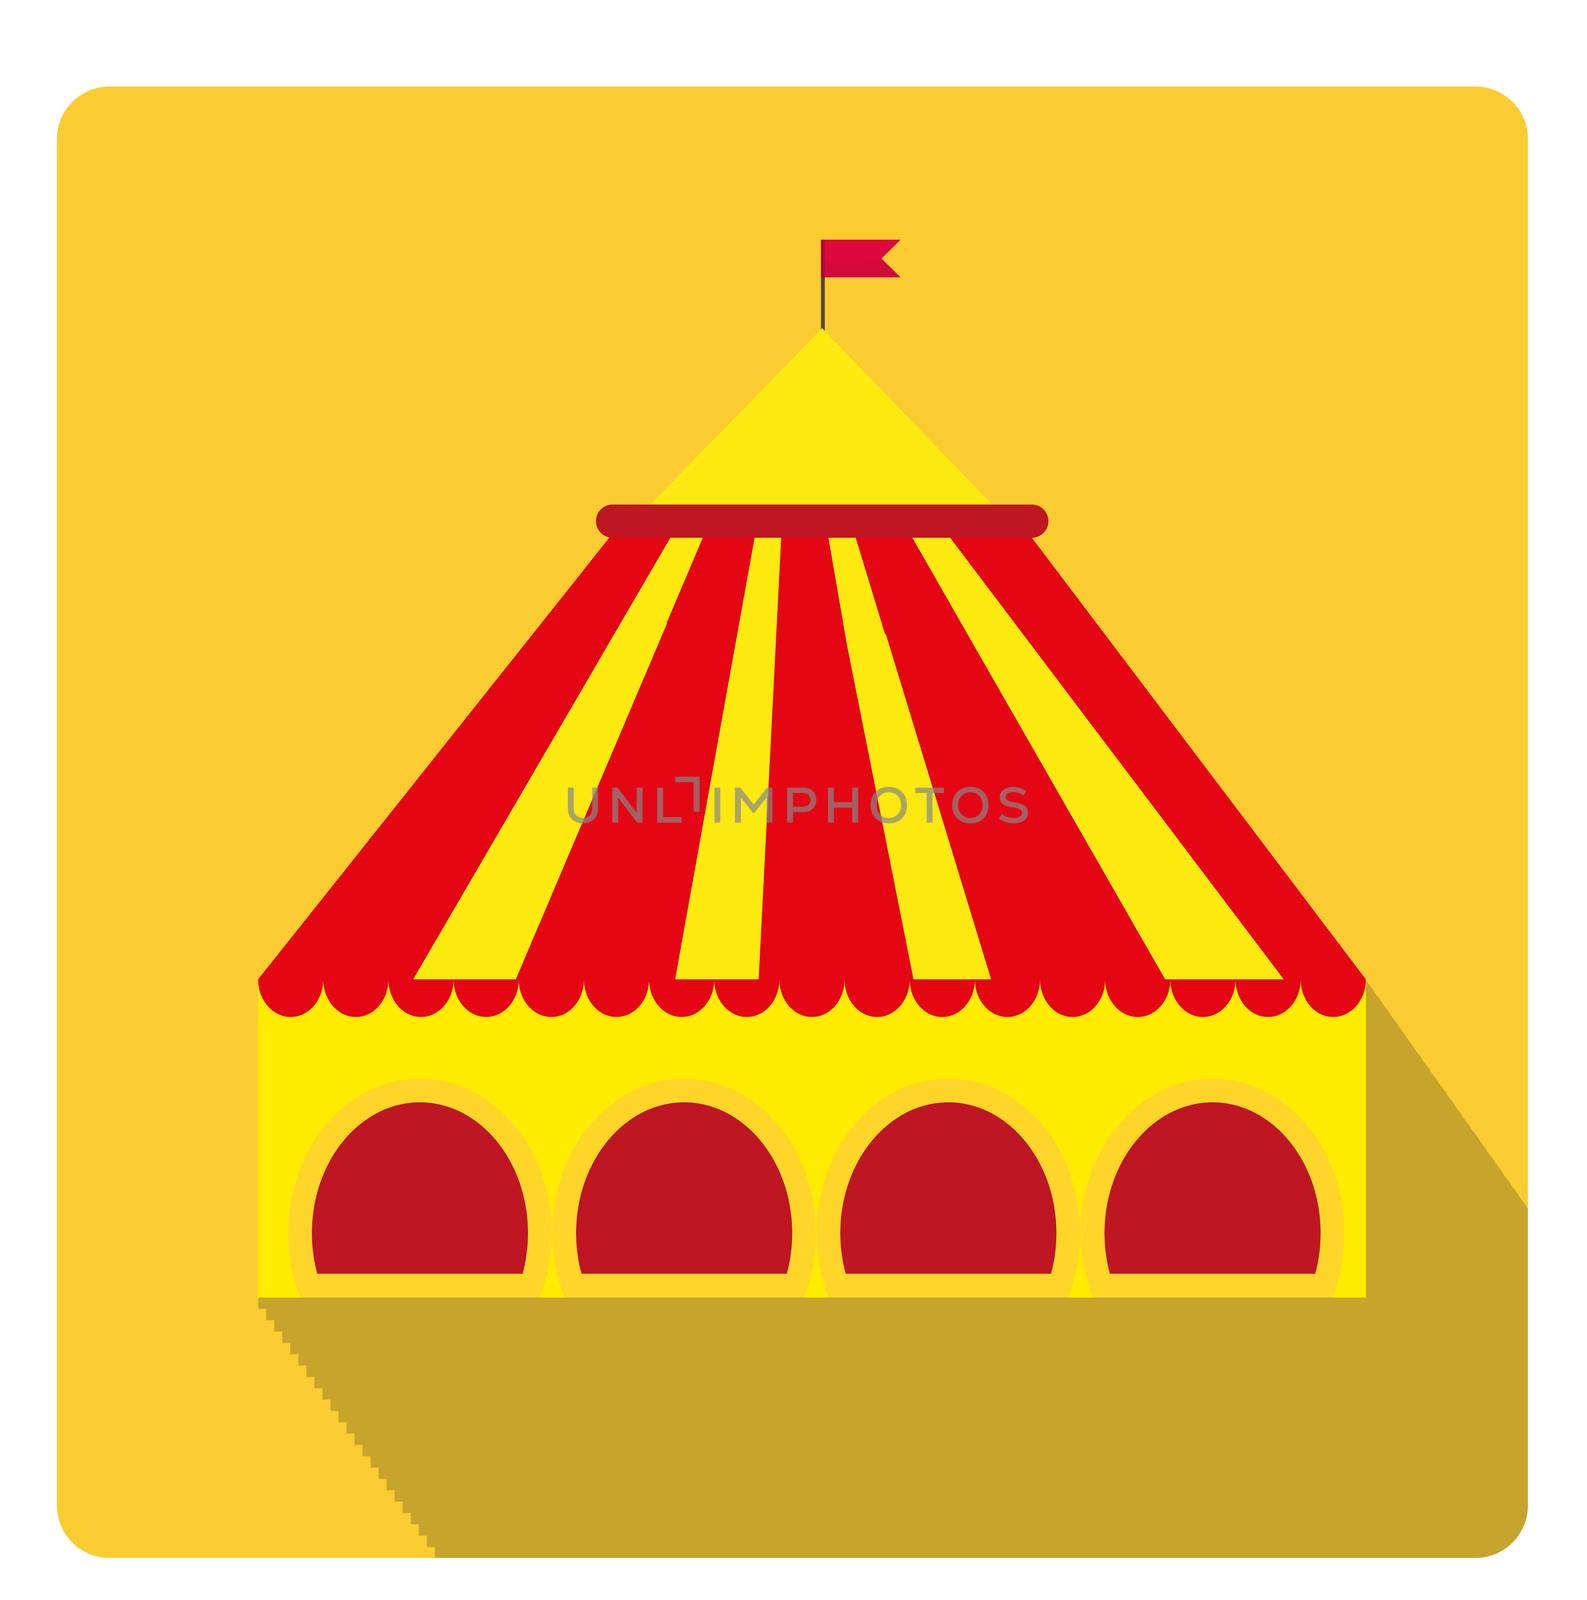 Circus pavilion, yellow tent icon flat style with long shadows, isolated on white background. illustration